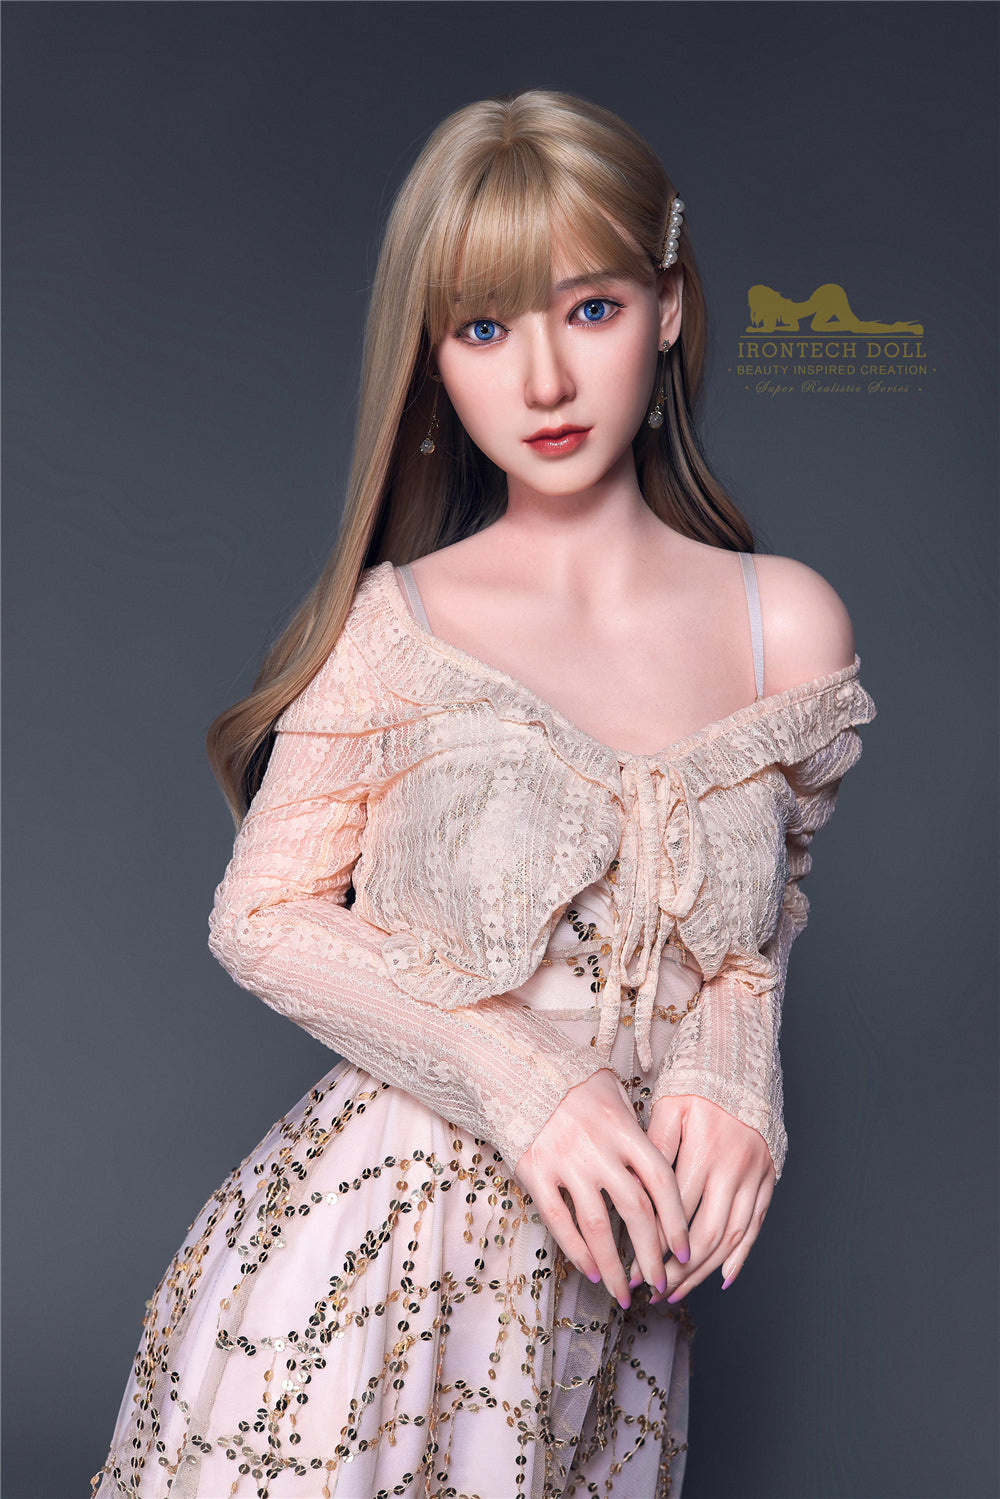 Irontech Doll 152 cm Silicone - Emmy | Buy Sex Dolls at DOLLS ACTUALLY